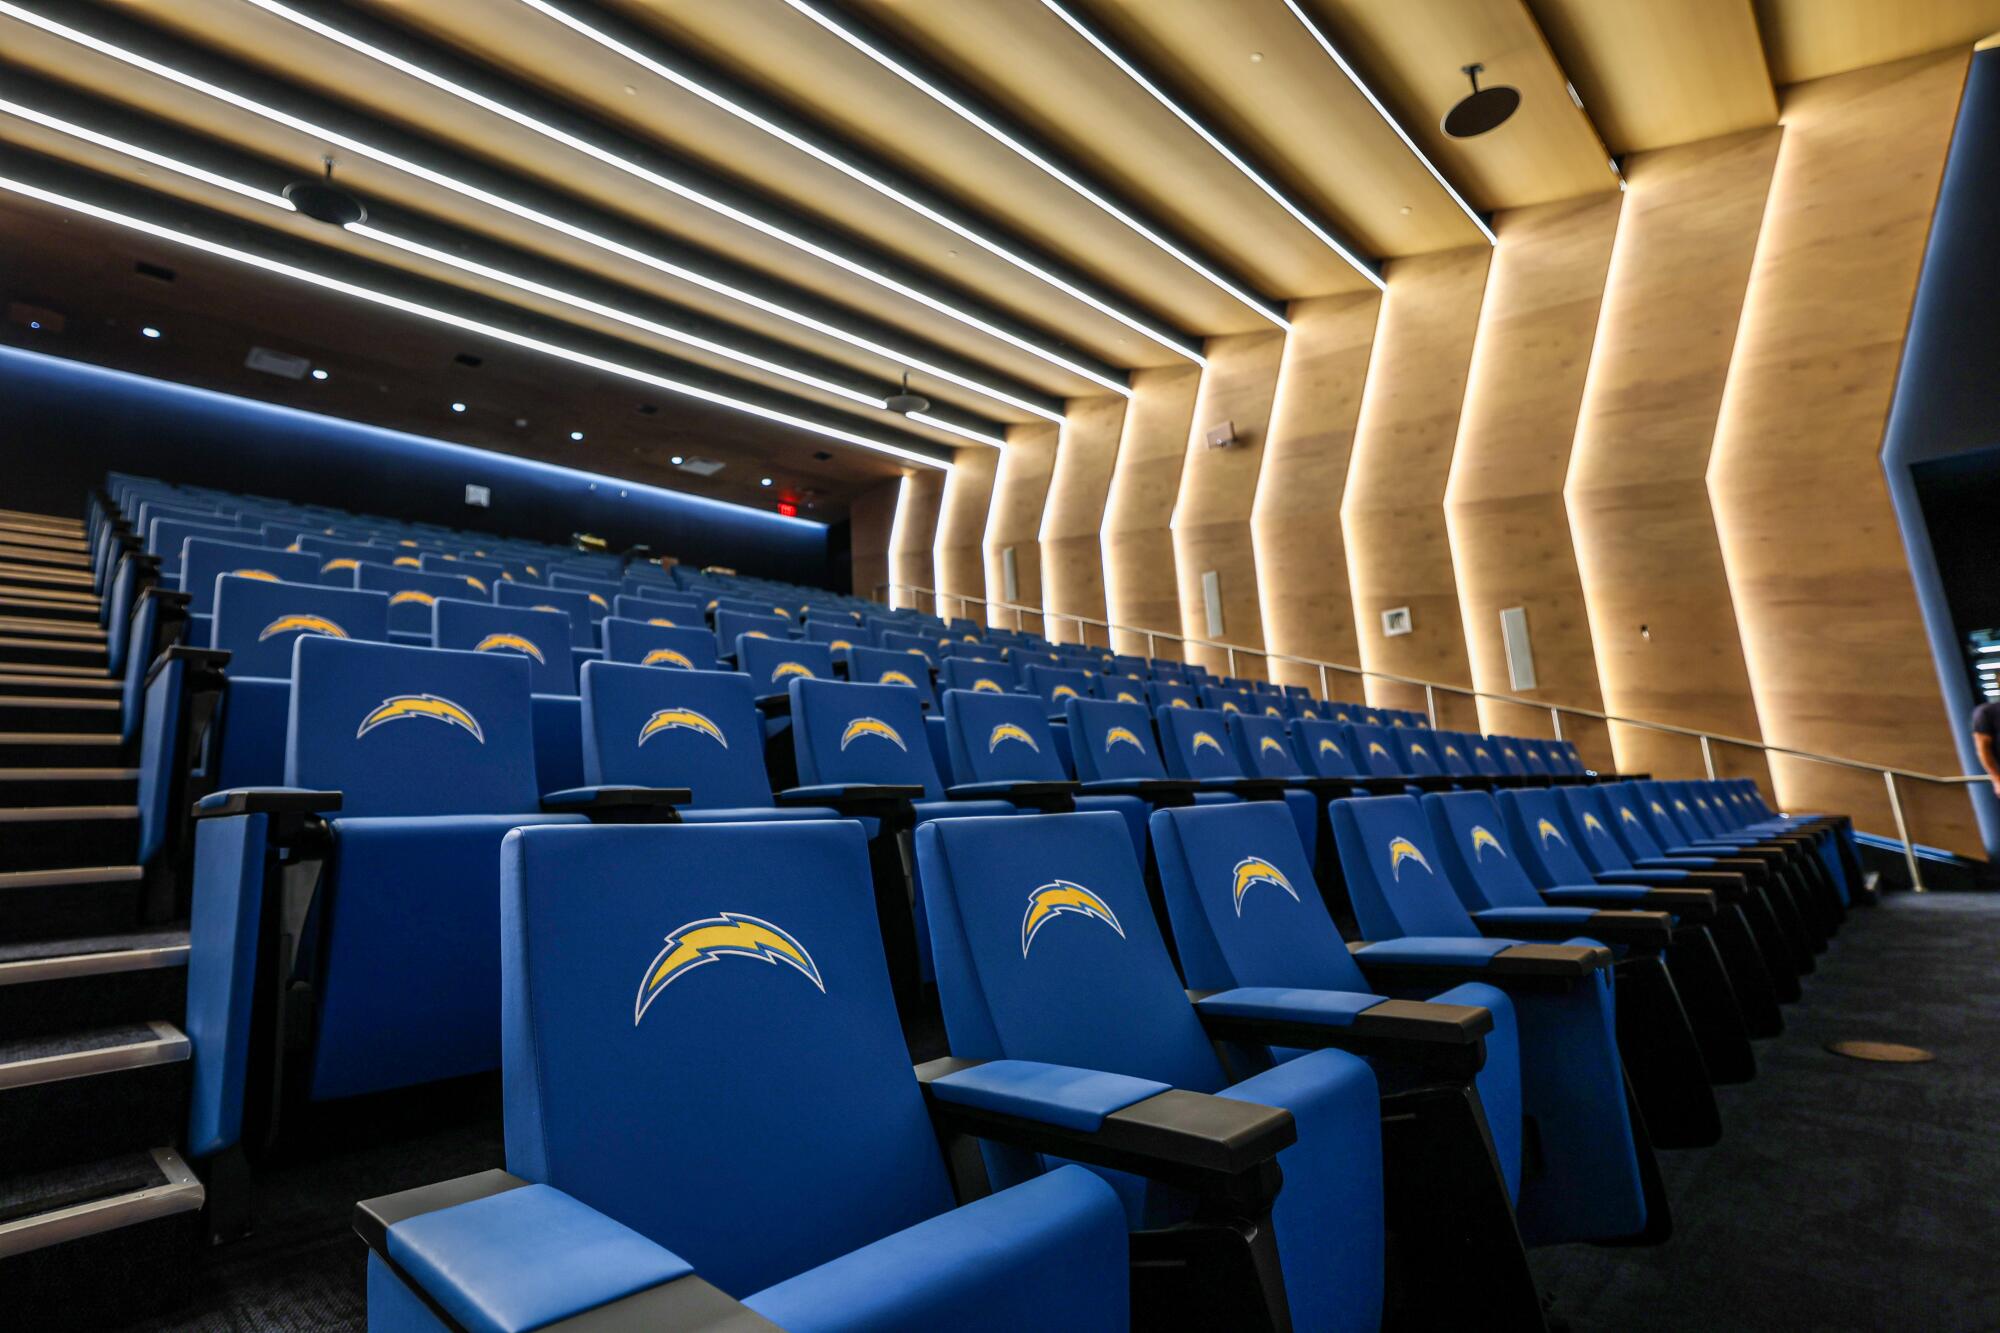 The Chargers' auditorium.